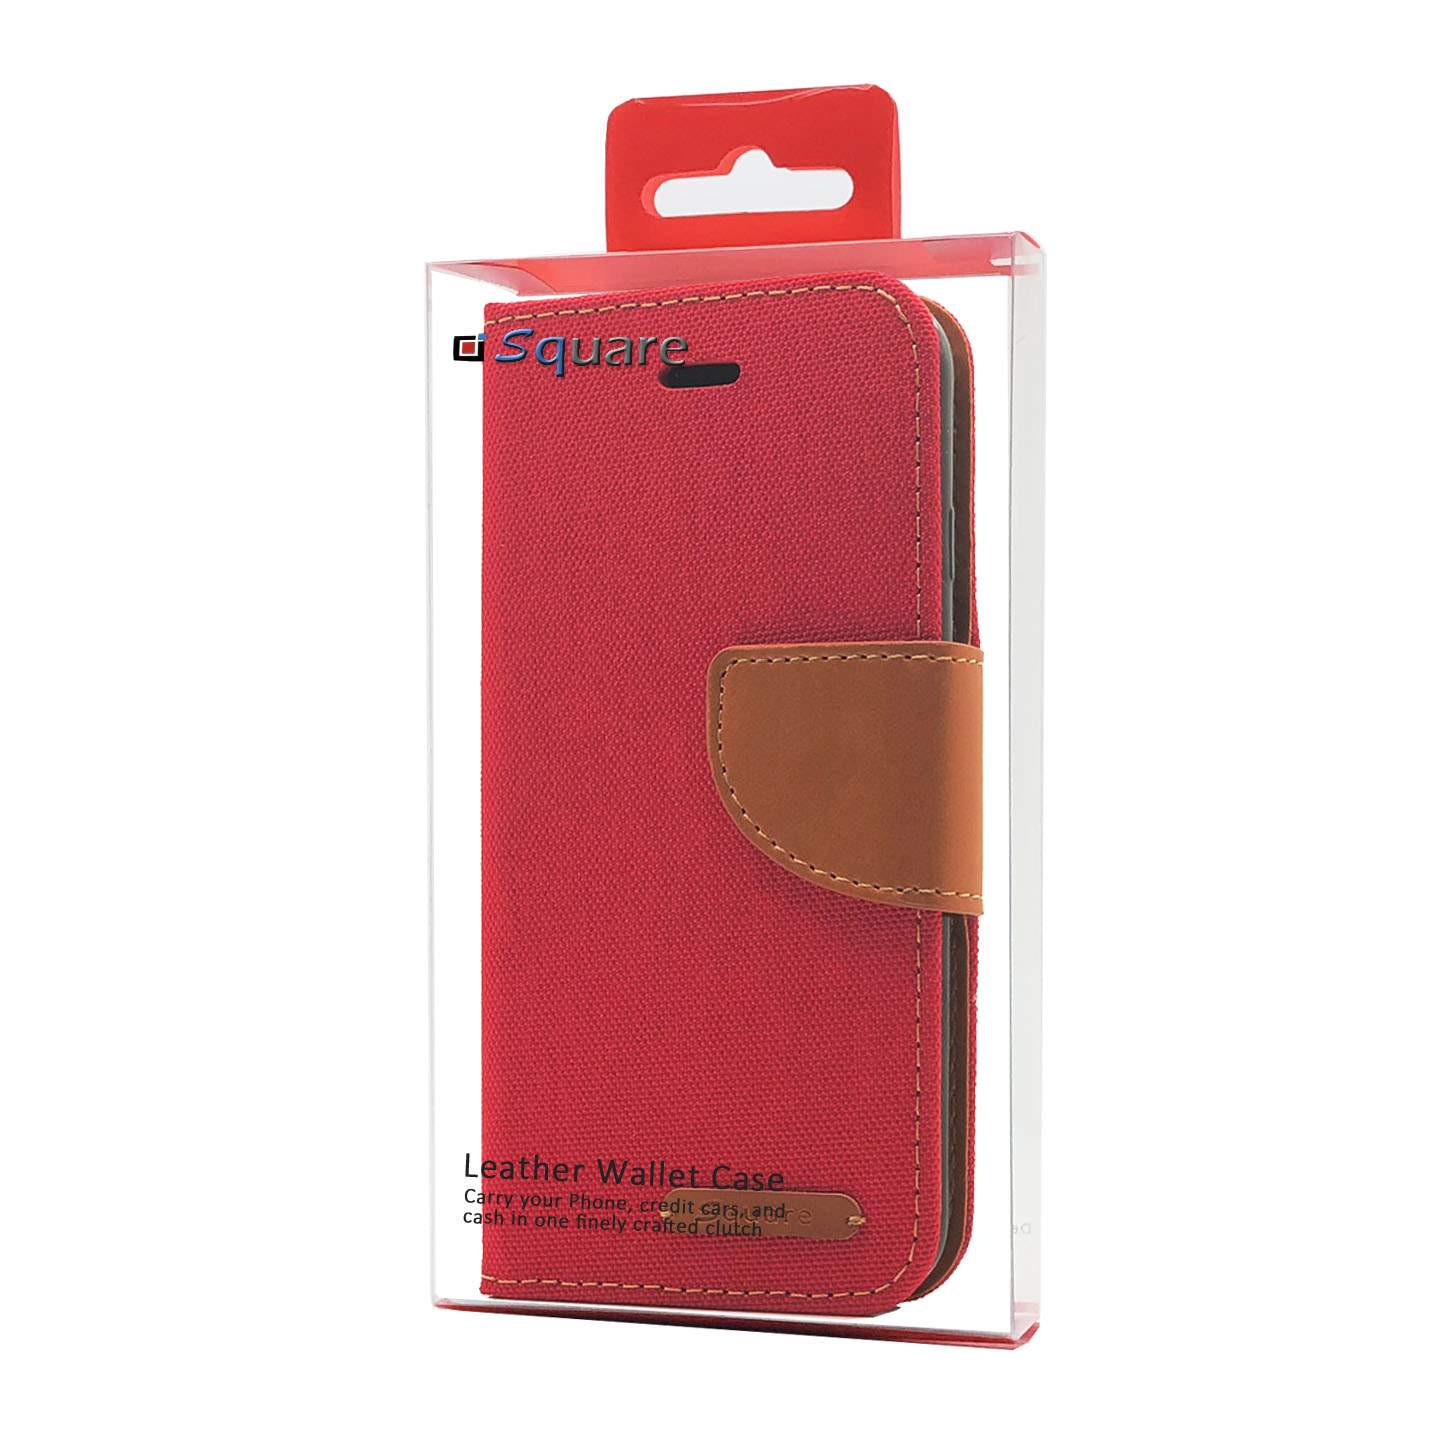 Mesh Wallet Case For Samsung Galaxy S10E (red)